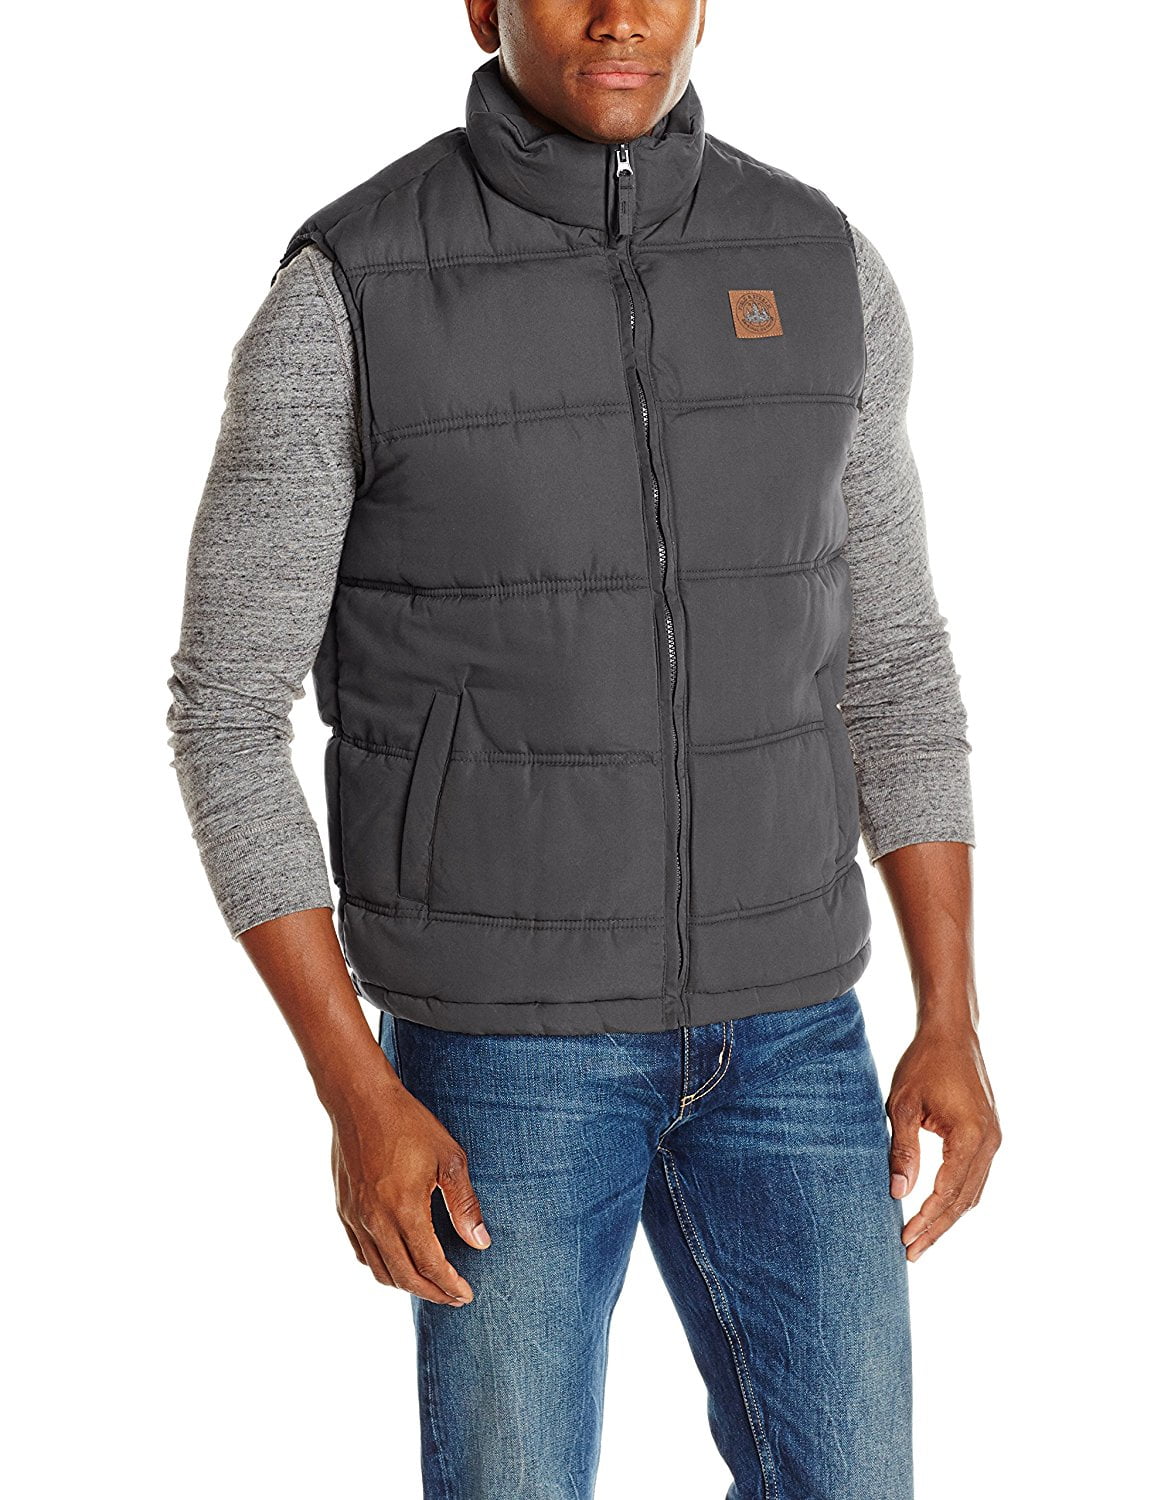 Field & Stream Gray Outerwear Vests for Men